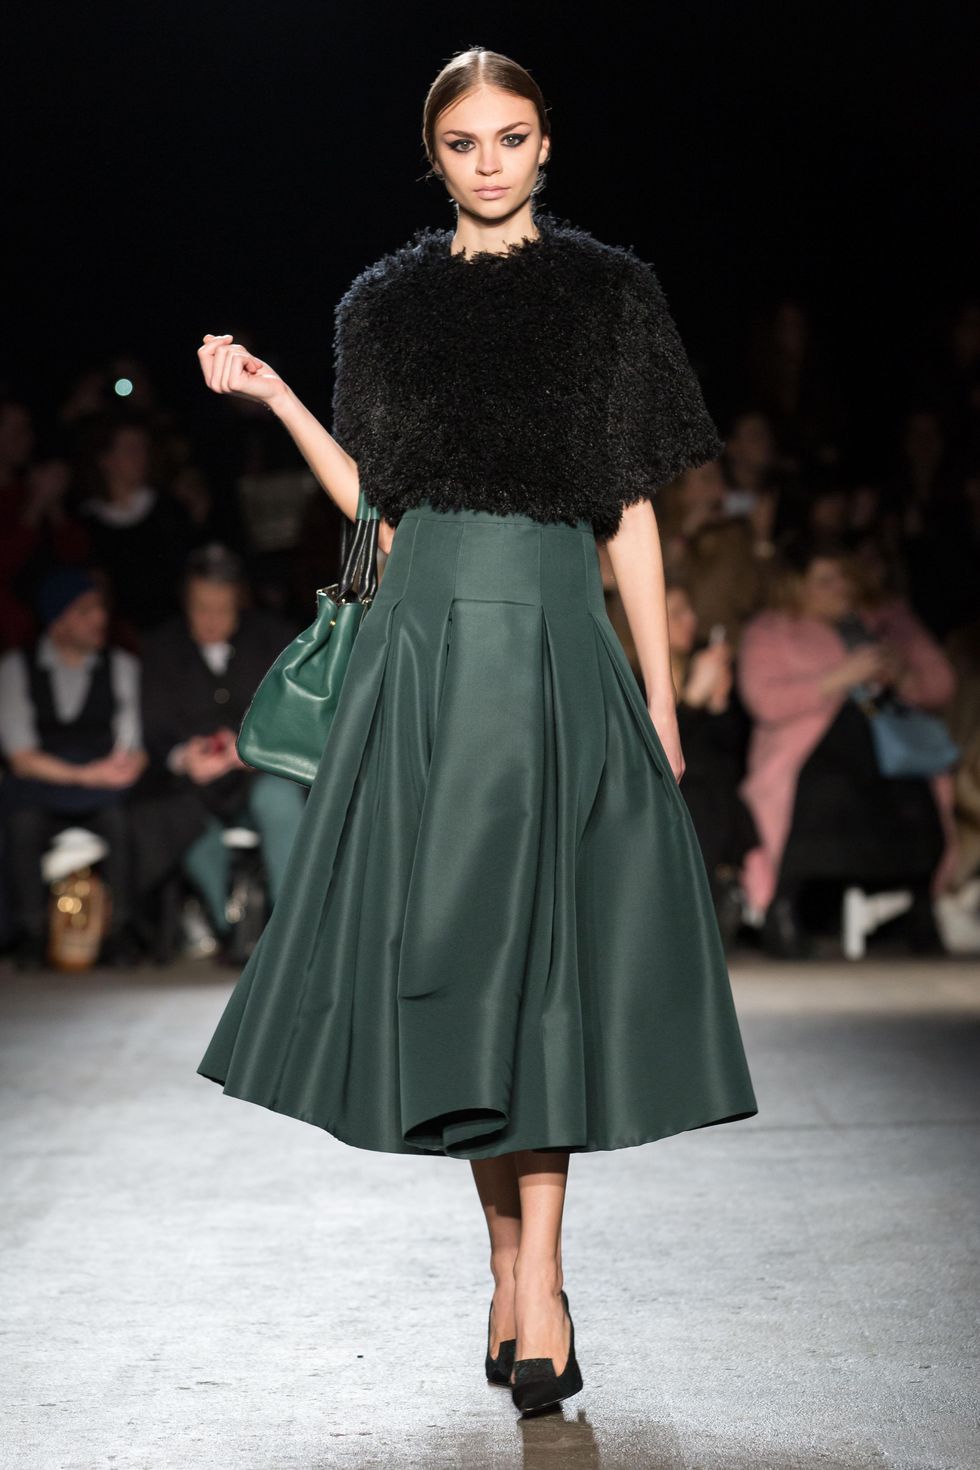 Christian Siriano fall collection look 3